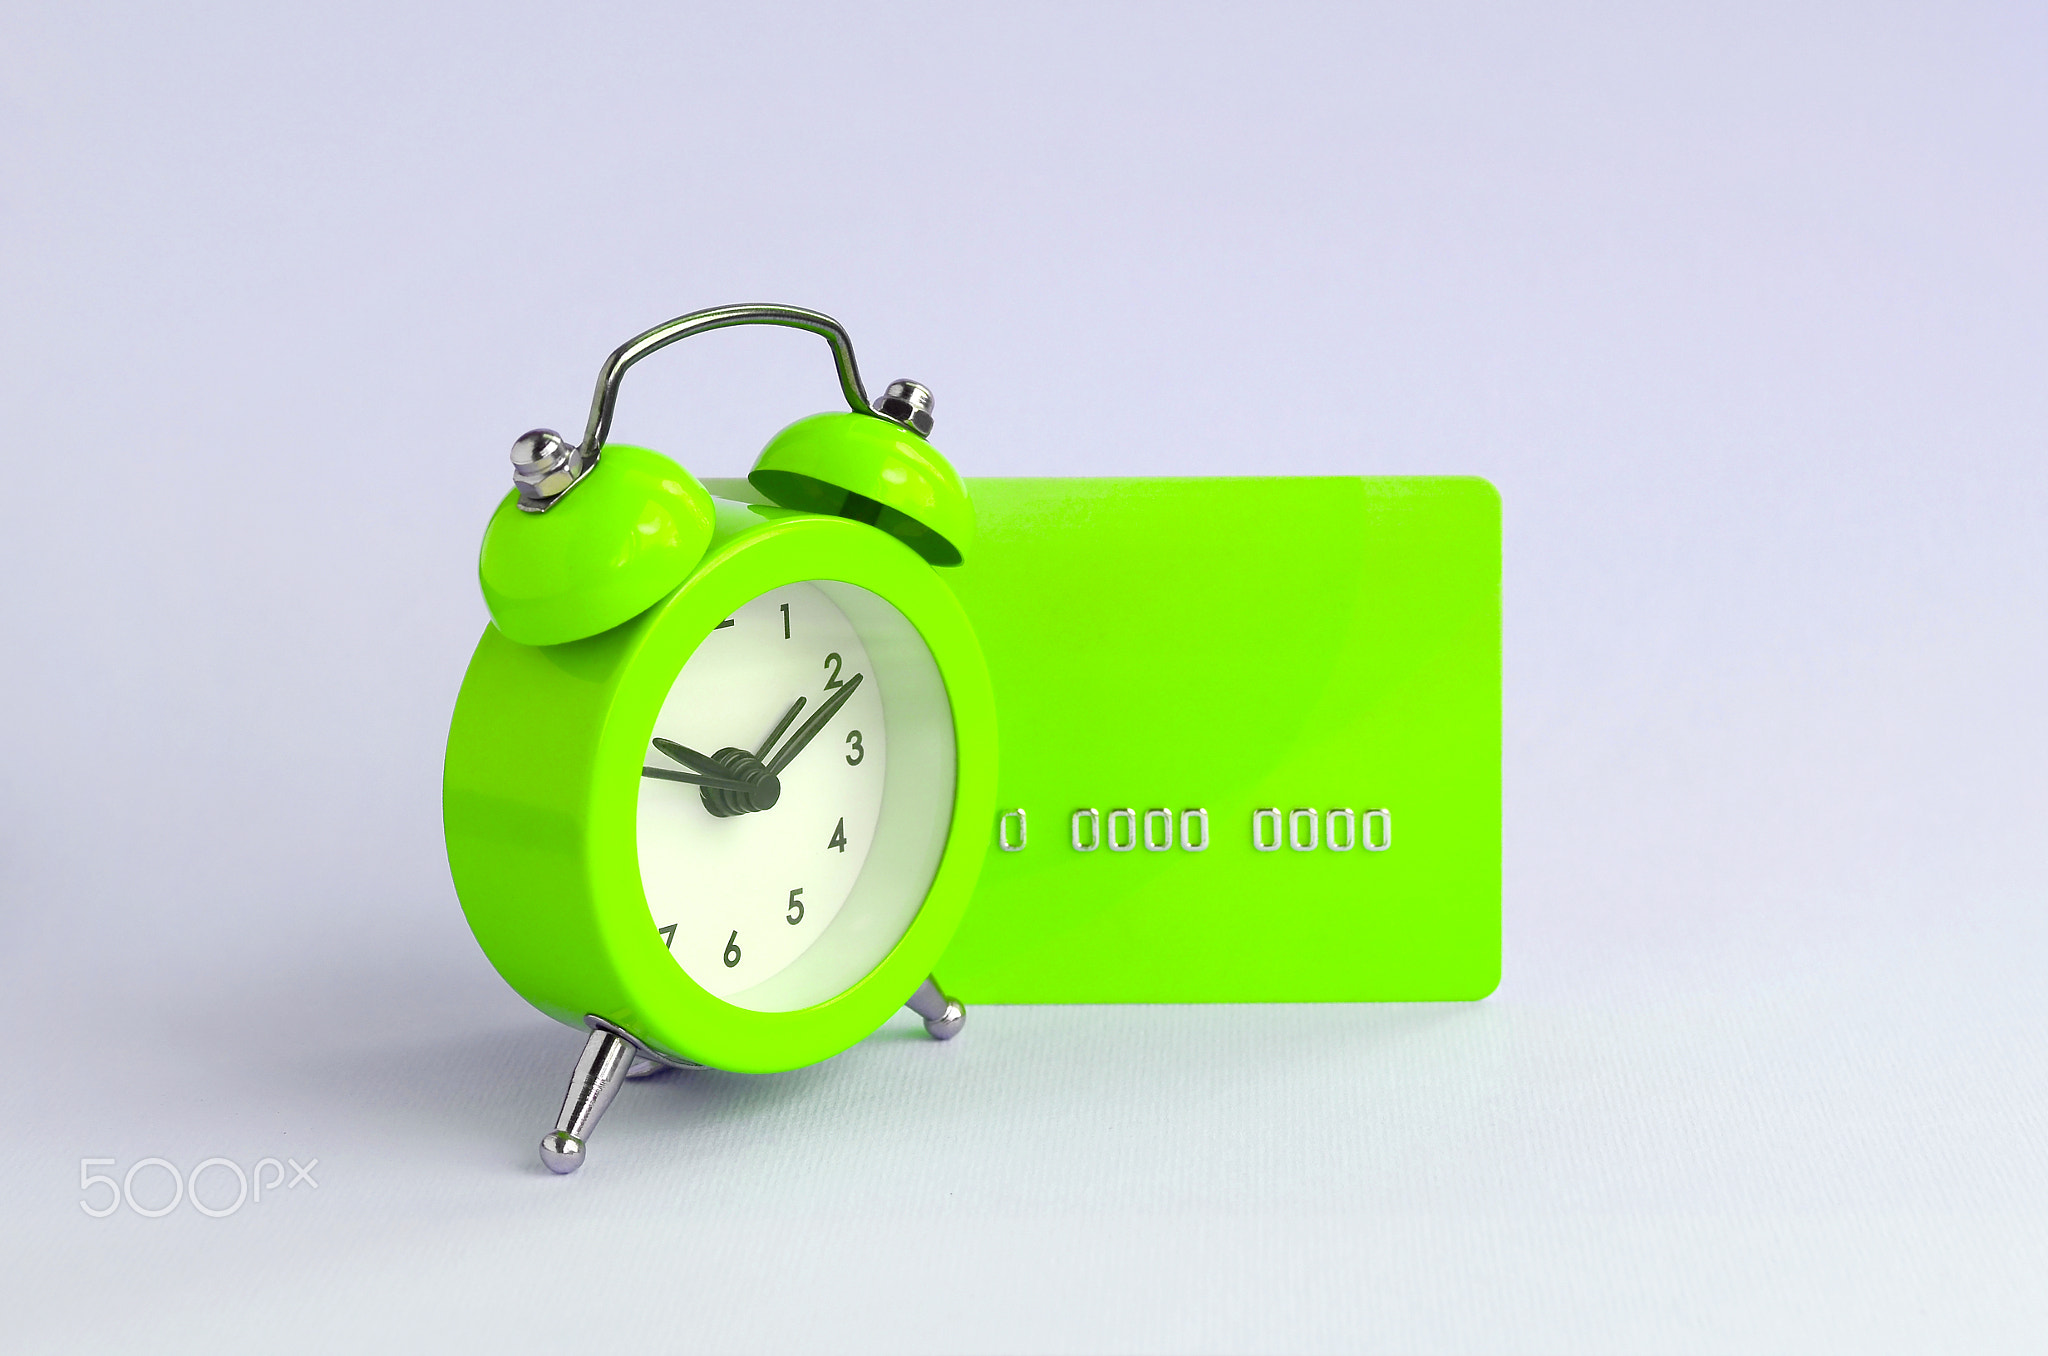 Small green alarm clock and blue credit card